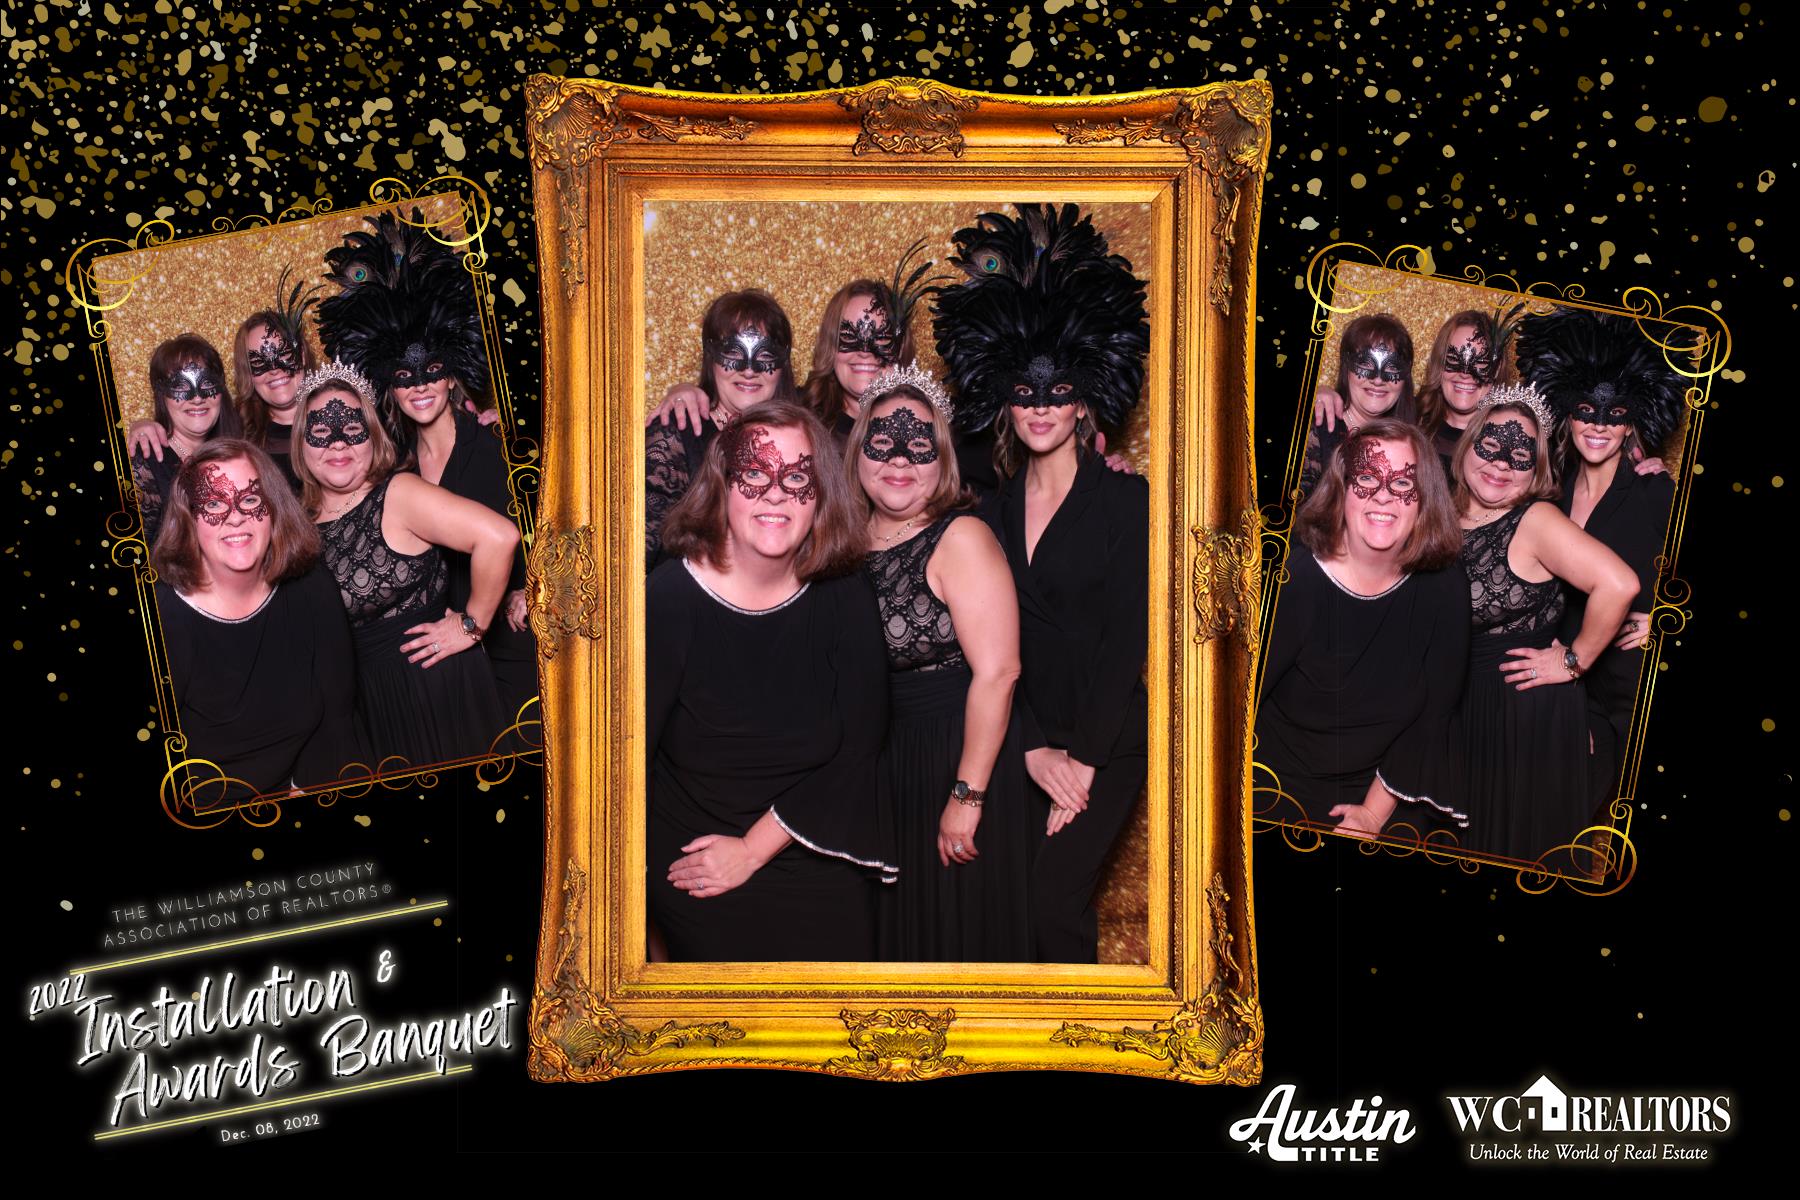 Banquet_Awards_Round_Rock_funfunparty_Mirror_Me_Photobooth_Comunity_Center_KW_Realtor_Georgetown_TX